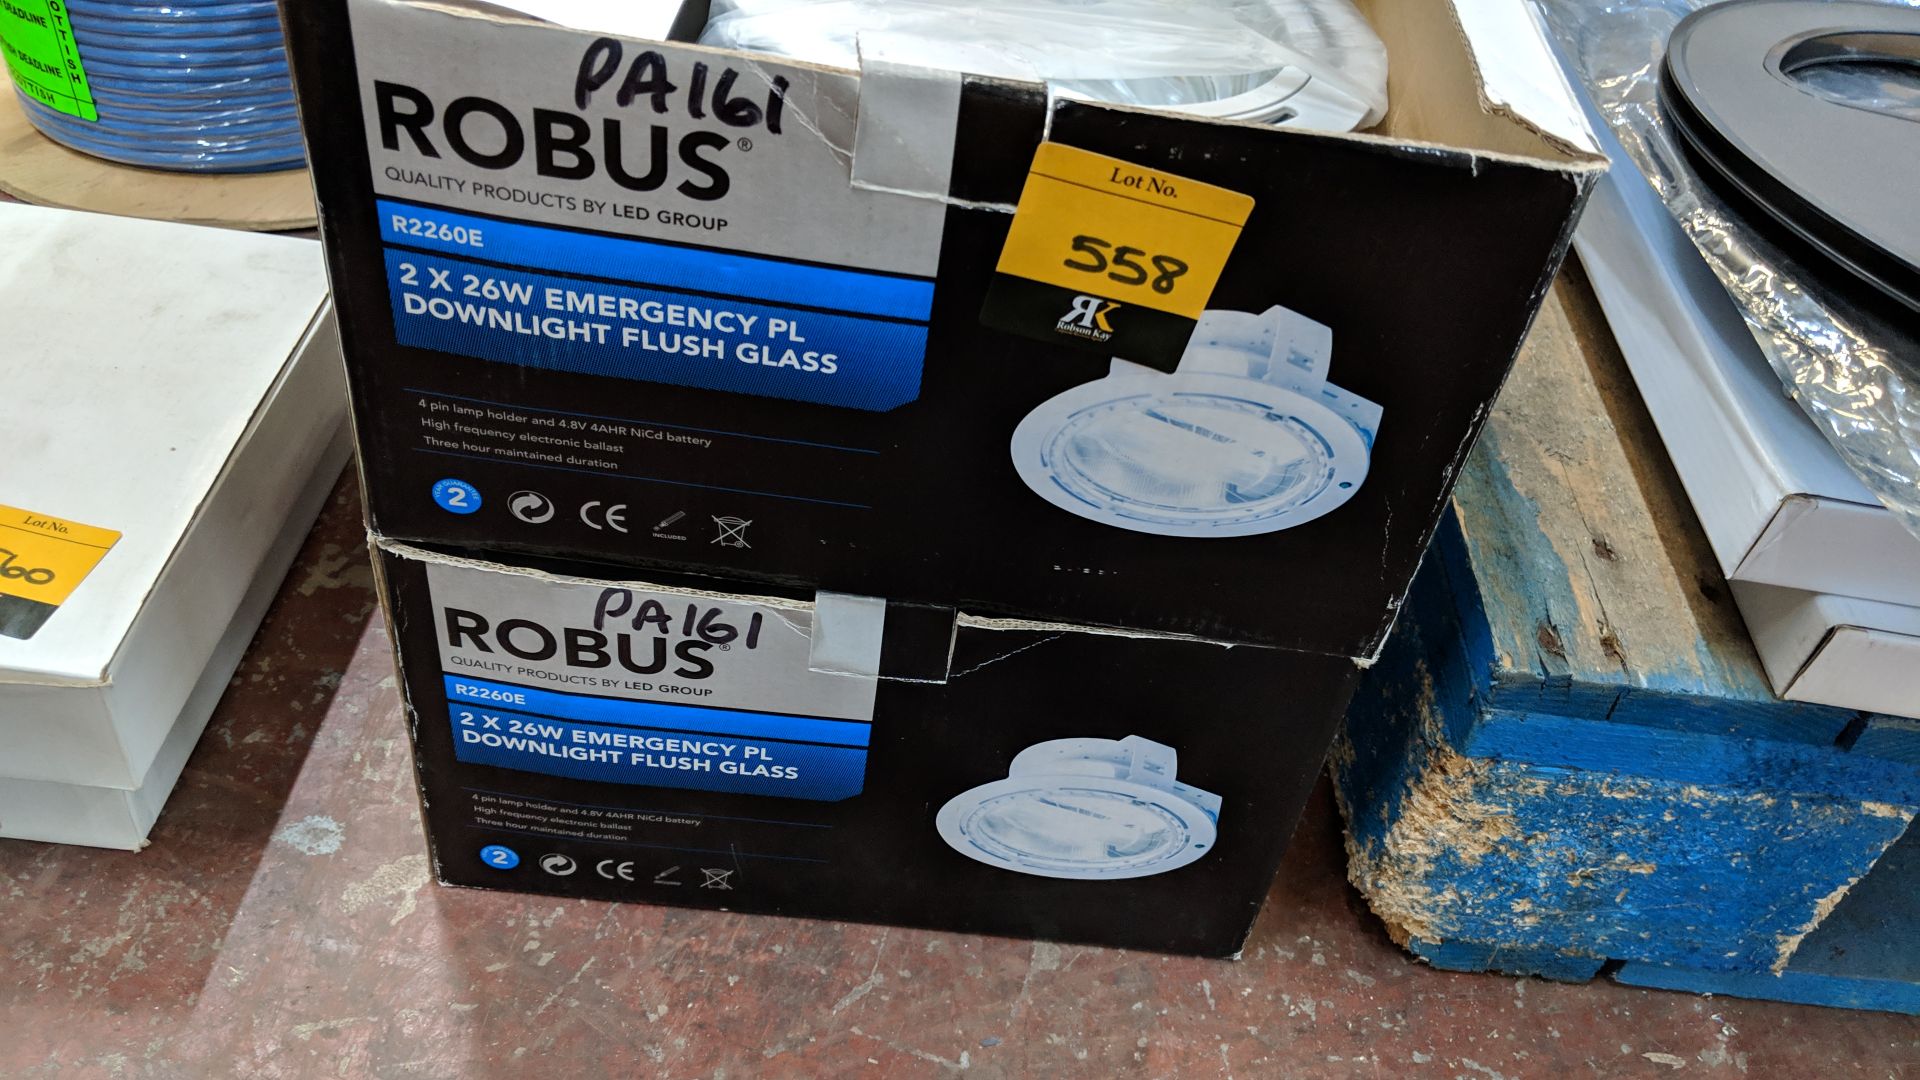 2 off Robus 2 x 26W emergency PL round downlight units with flush glass This lot is one of a - Bild 2 aus 2